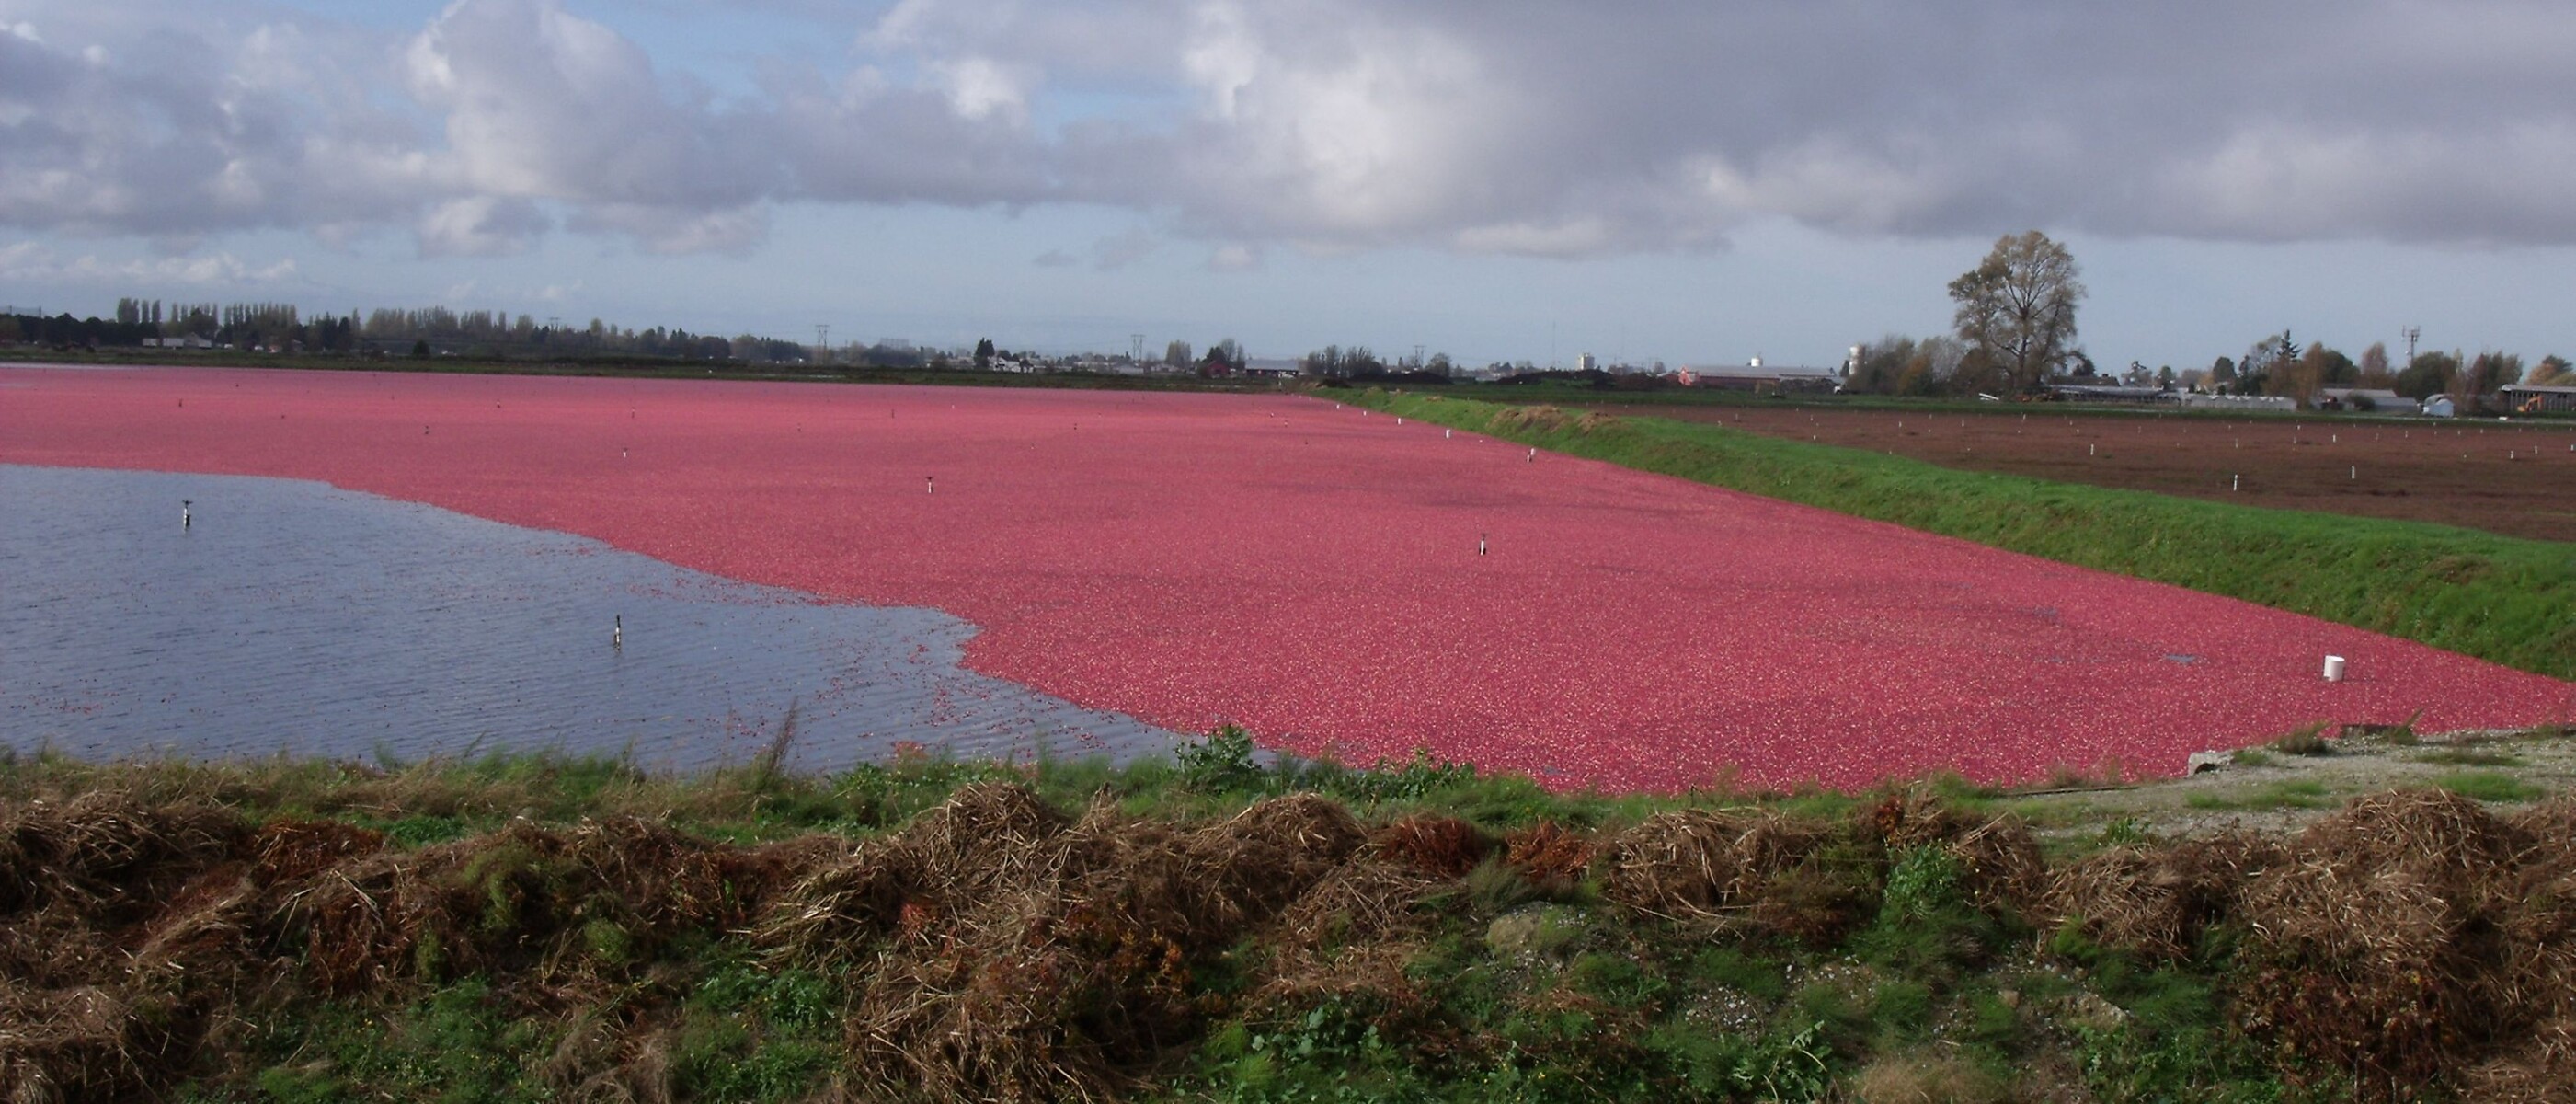 KSB submersible motor pumps support cranberry cultivation